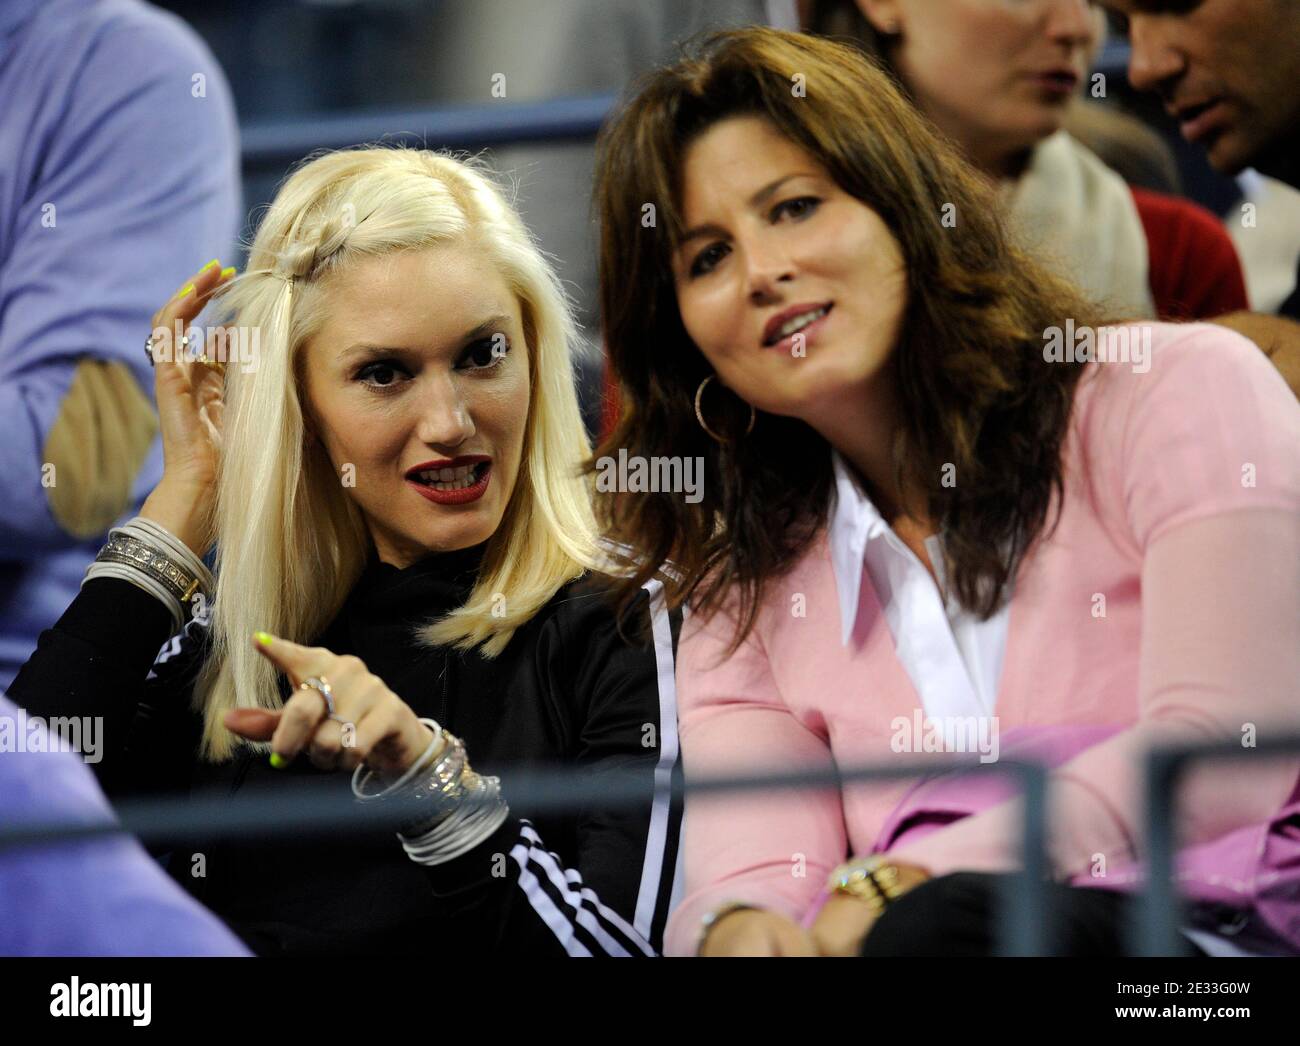 Gwen Stefani and Mirka Federer during day eight of the US Open, at Flushing Meadows, New York, USA on September 6, 2010. Photo by Mehdi Taamallah/ABACAPRESS.COM Stock Photo